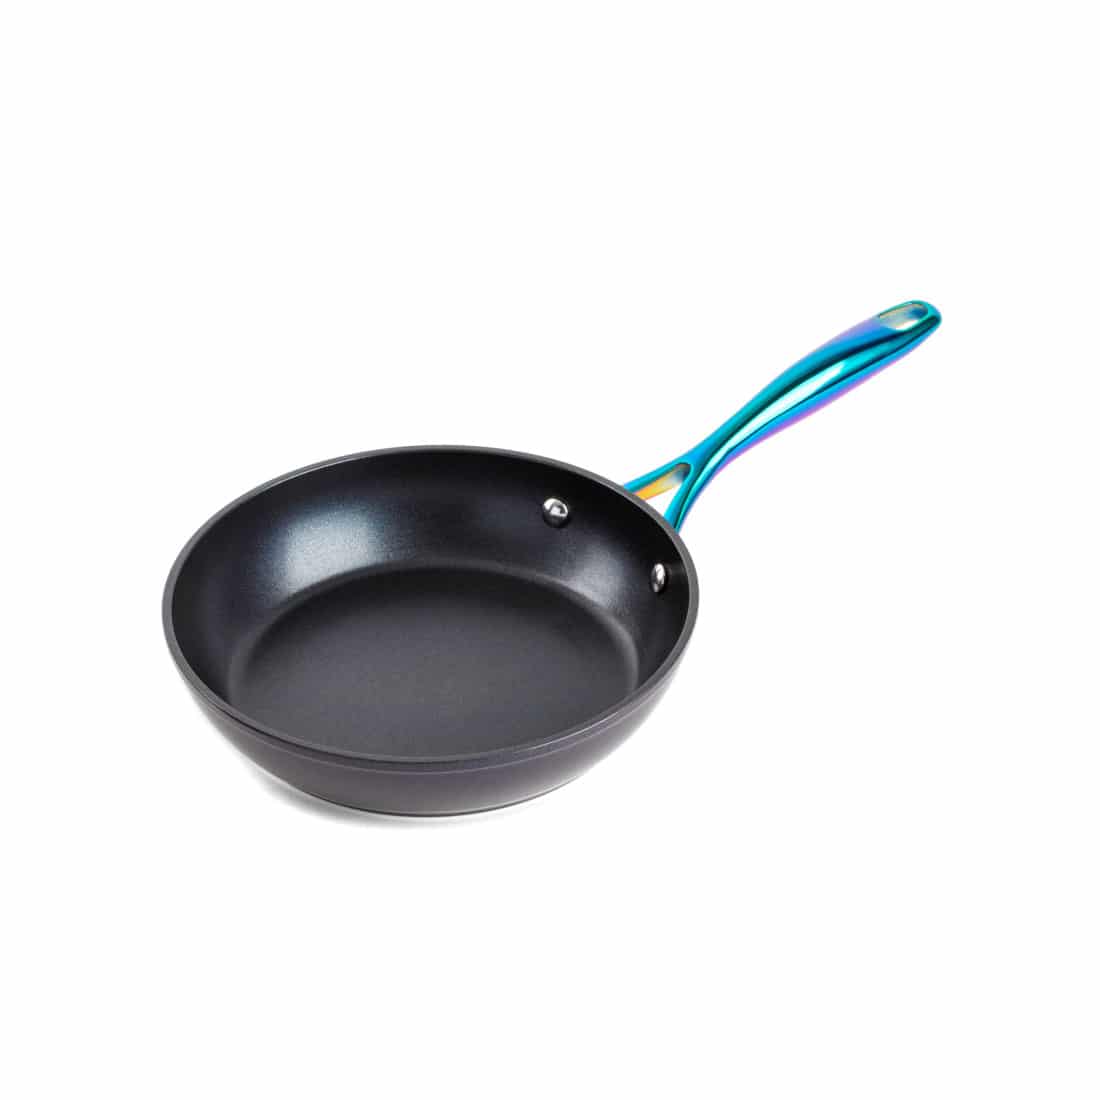 https://explorethymeandtable.com/wp-content/uploads/2021/02/rainbow-8in-frypan.jpg